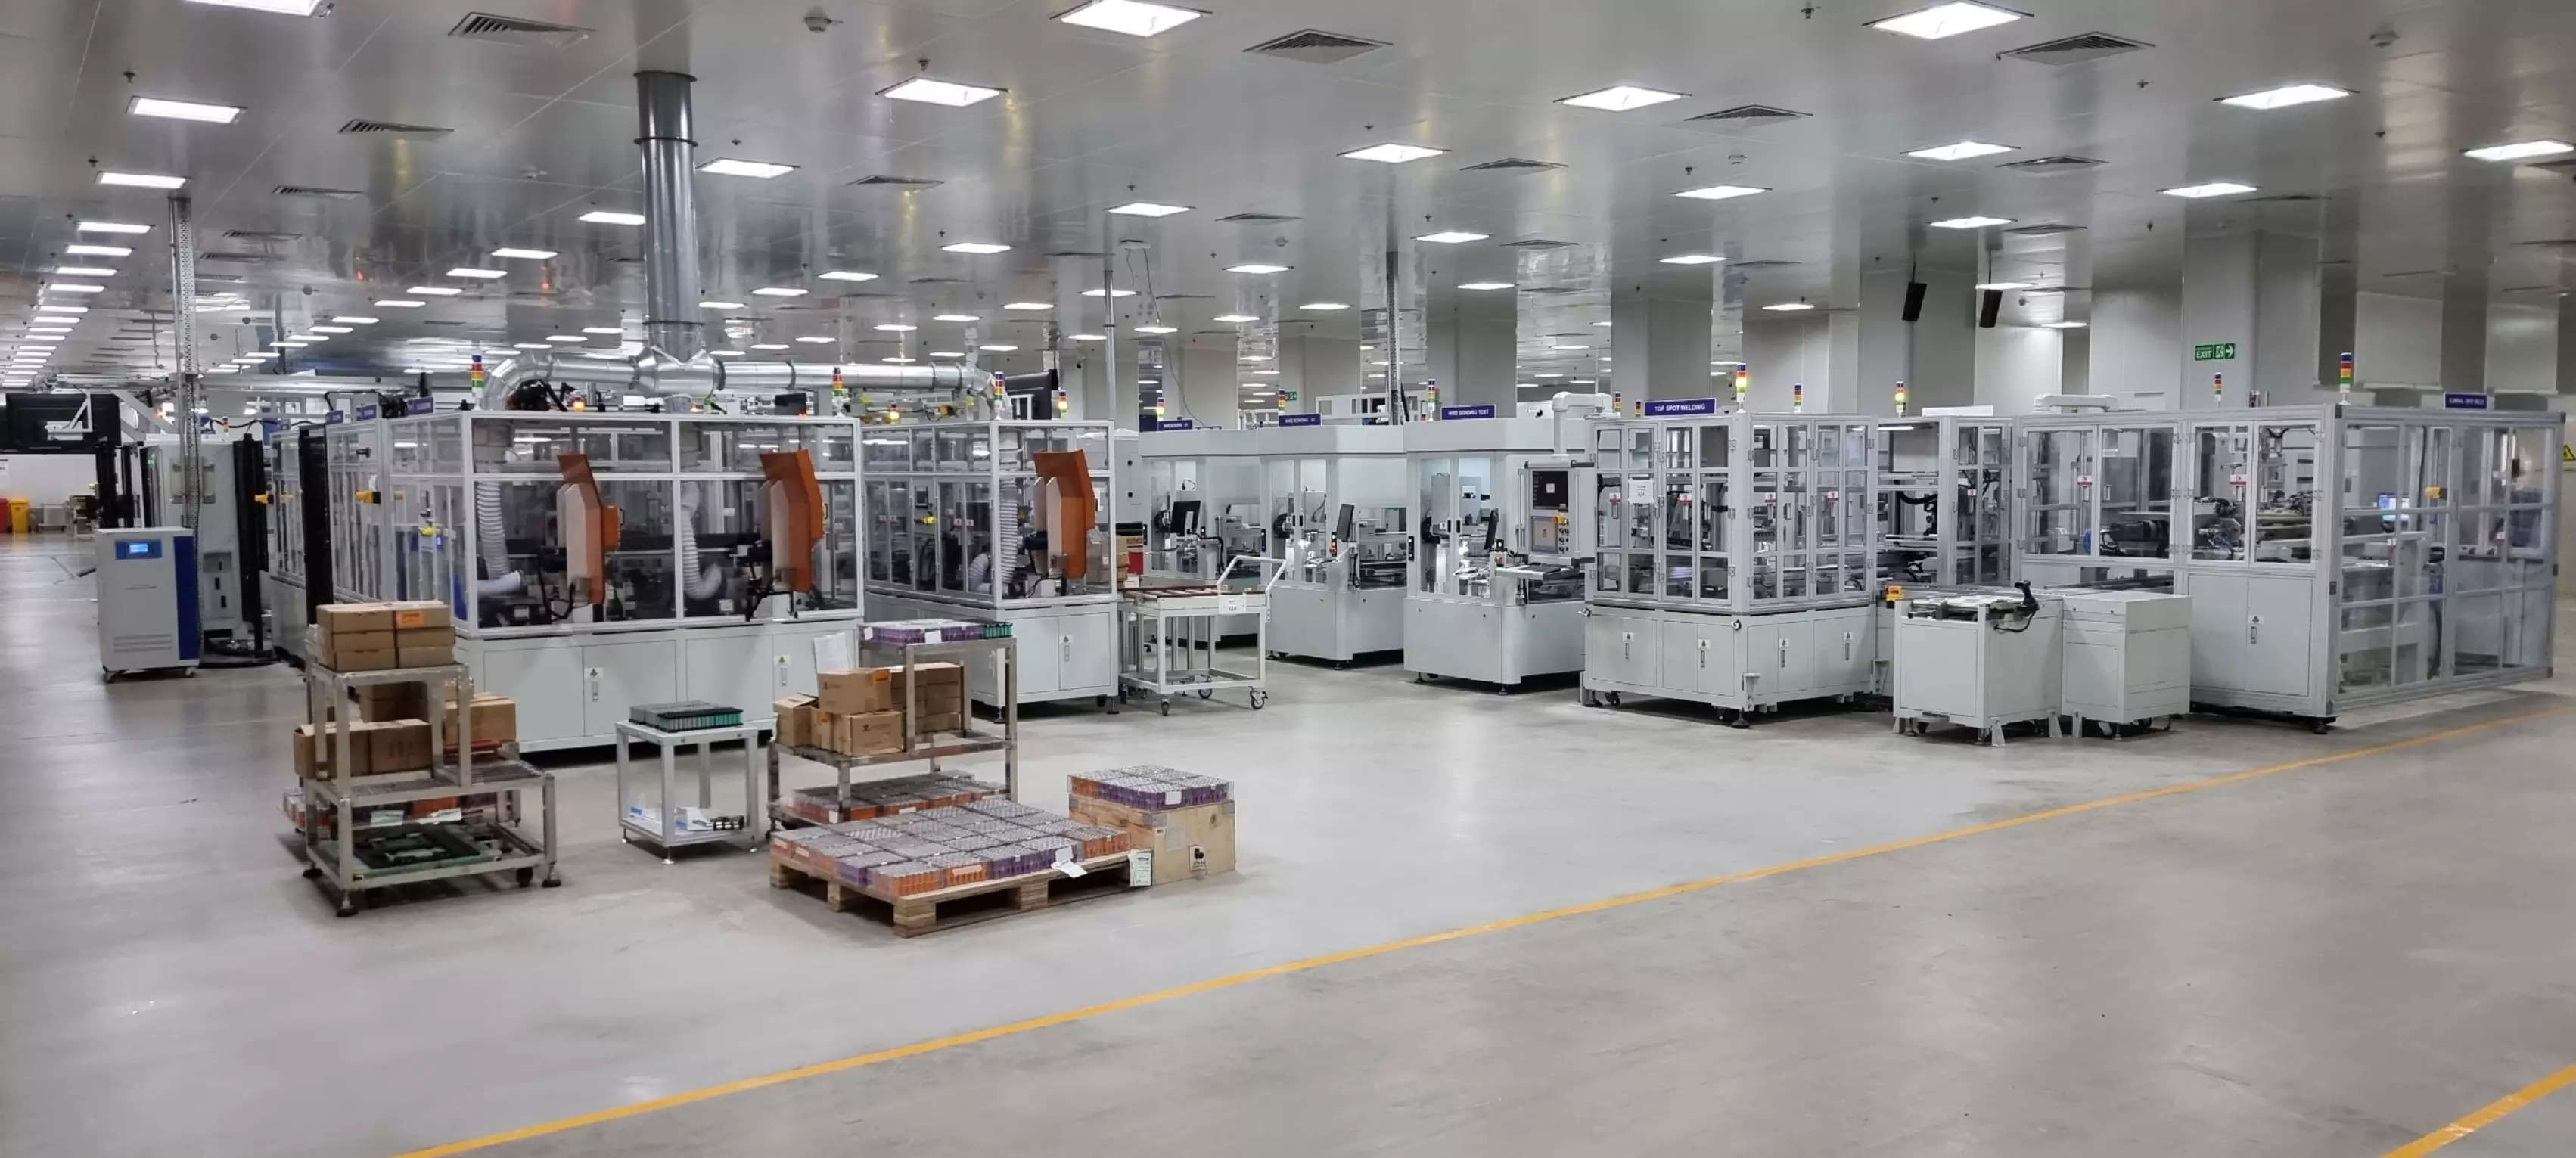 li-on batteries: nexcharge starts mass production of li-ion battery packs at its new plant in gujarat, auto news, et auto